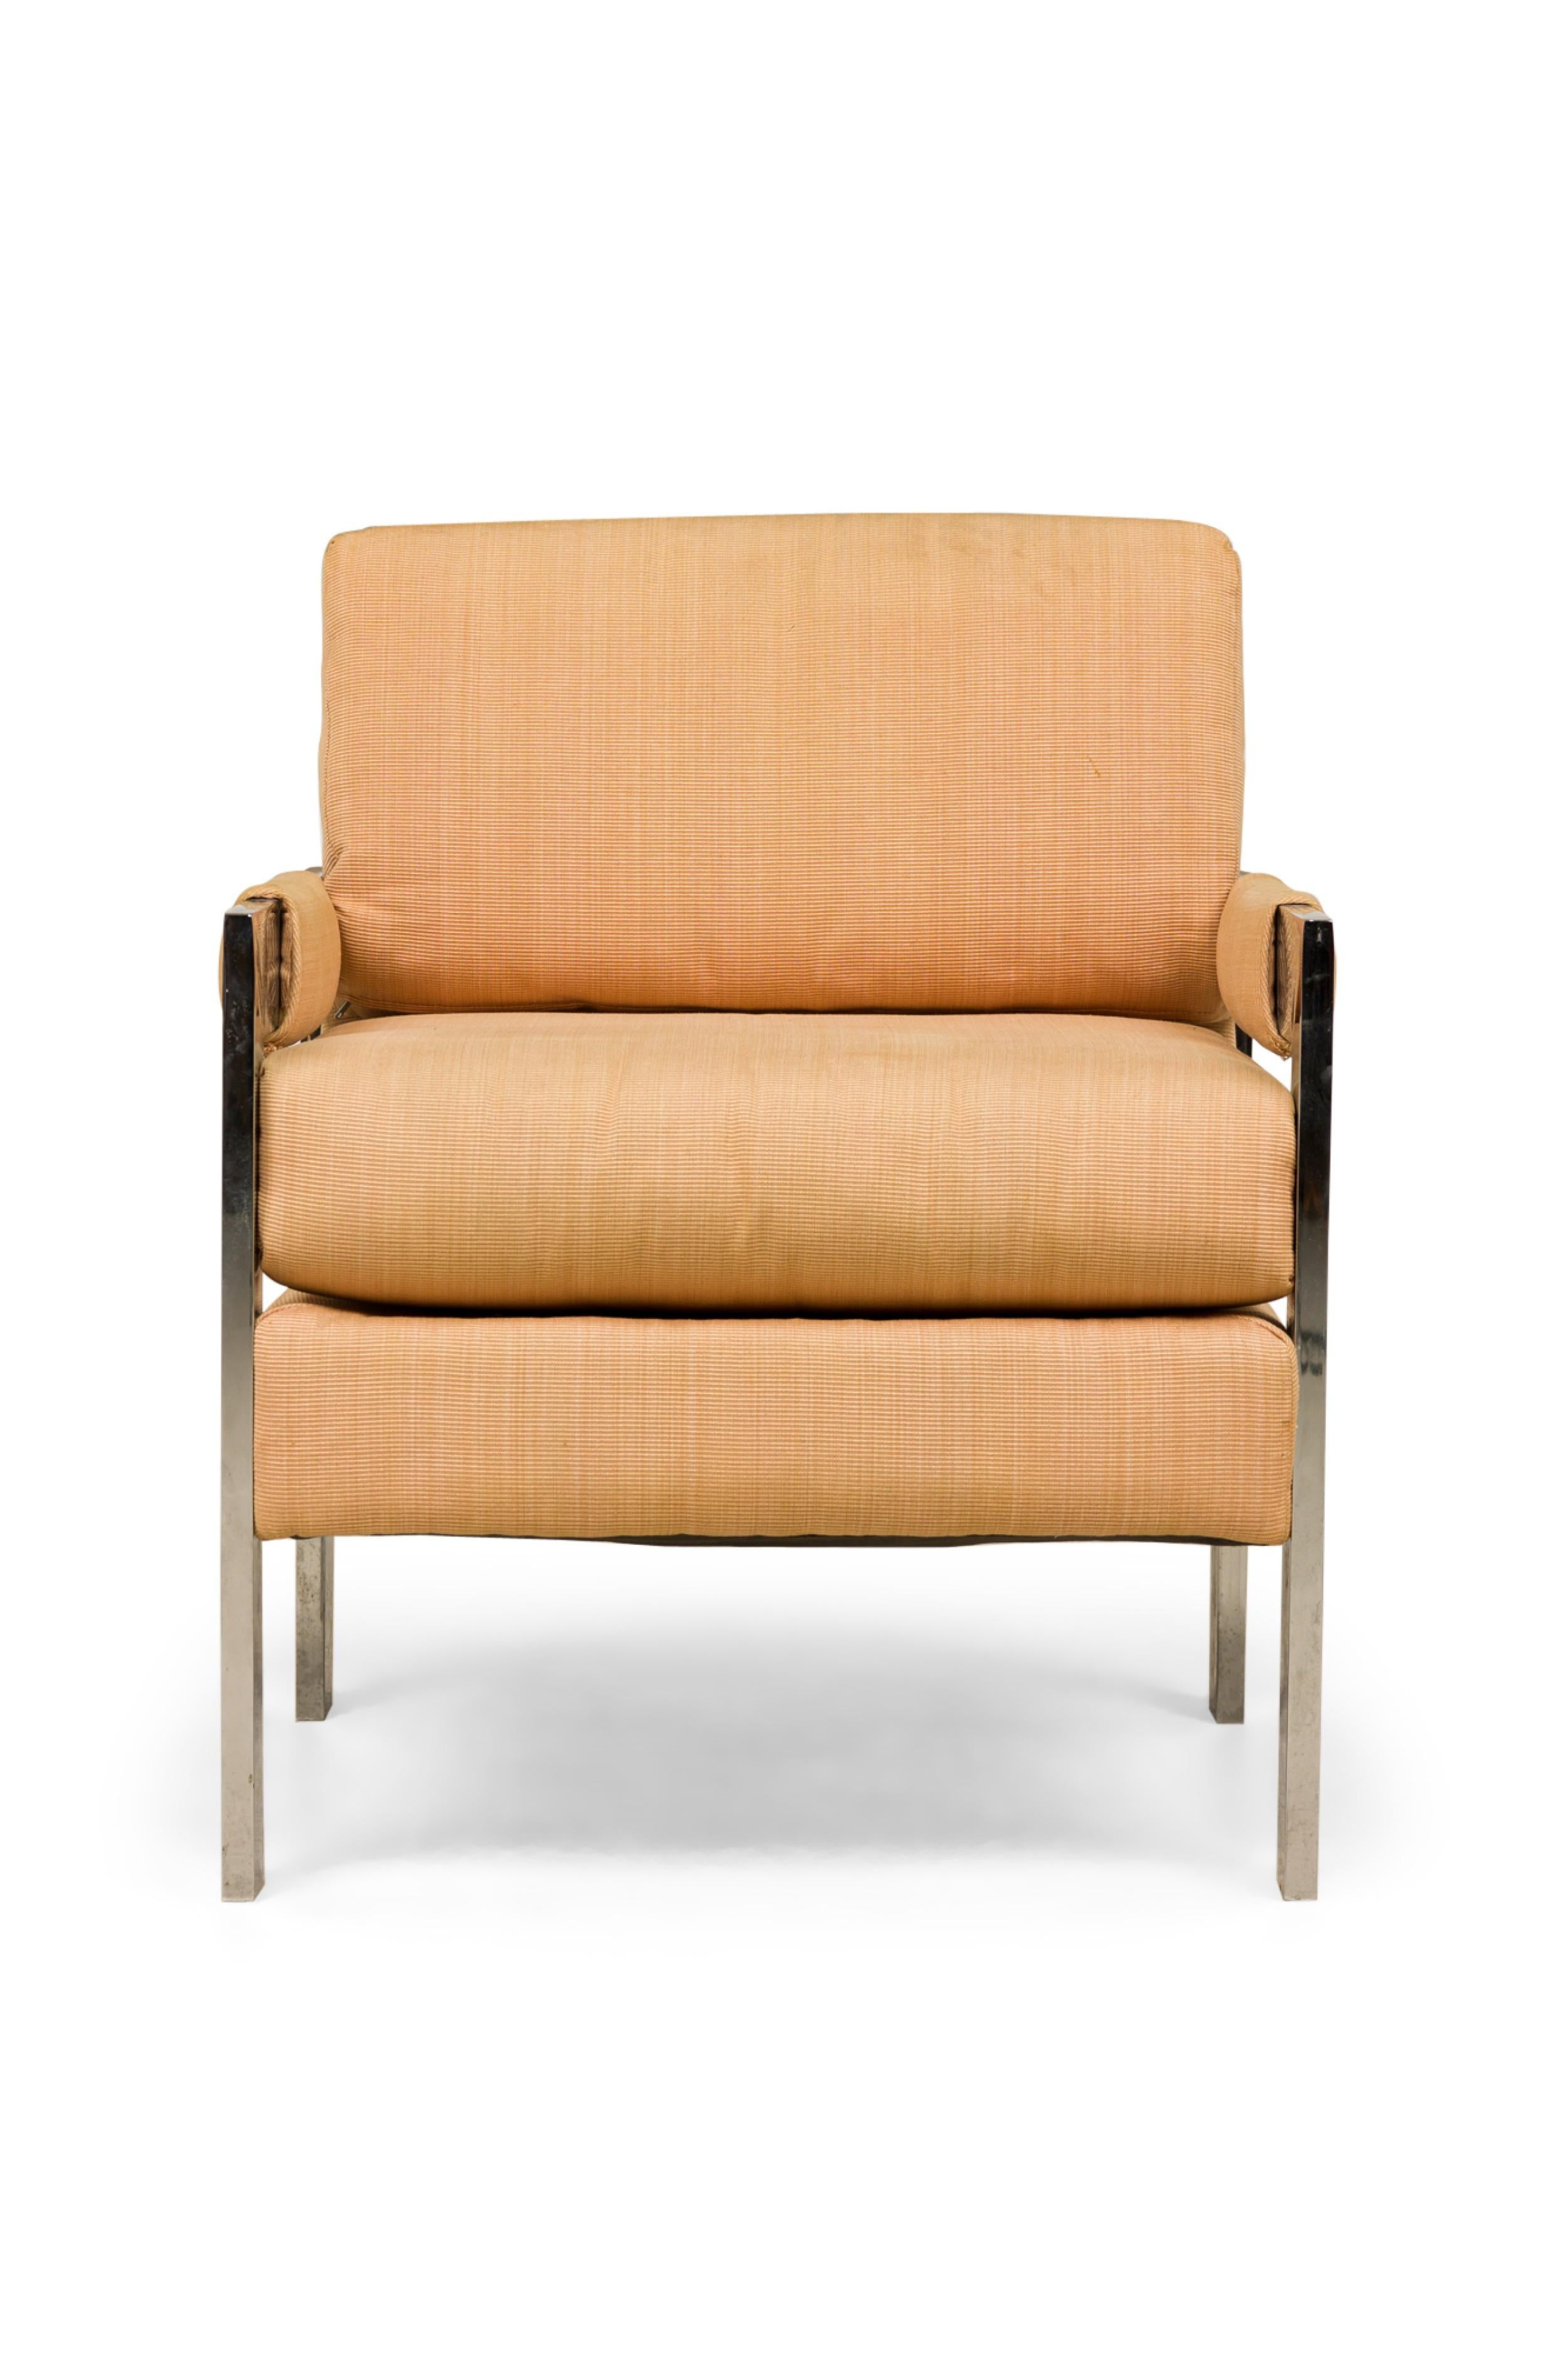 PAIR of American Mid-Century armchairs with polished chrome flat bar frames, upholstered in a textured tan fabric with removable seat cushions. (MILO BAUGHMAN FOR DIRECTIONAL)(PRICED AS PAIR)
 

 Some wear on upholstery.
